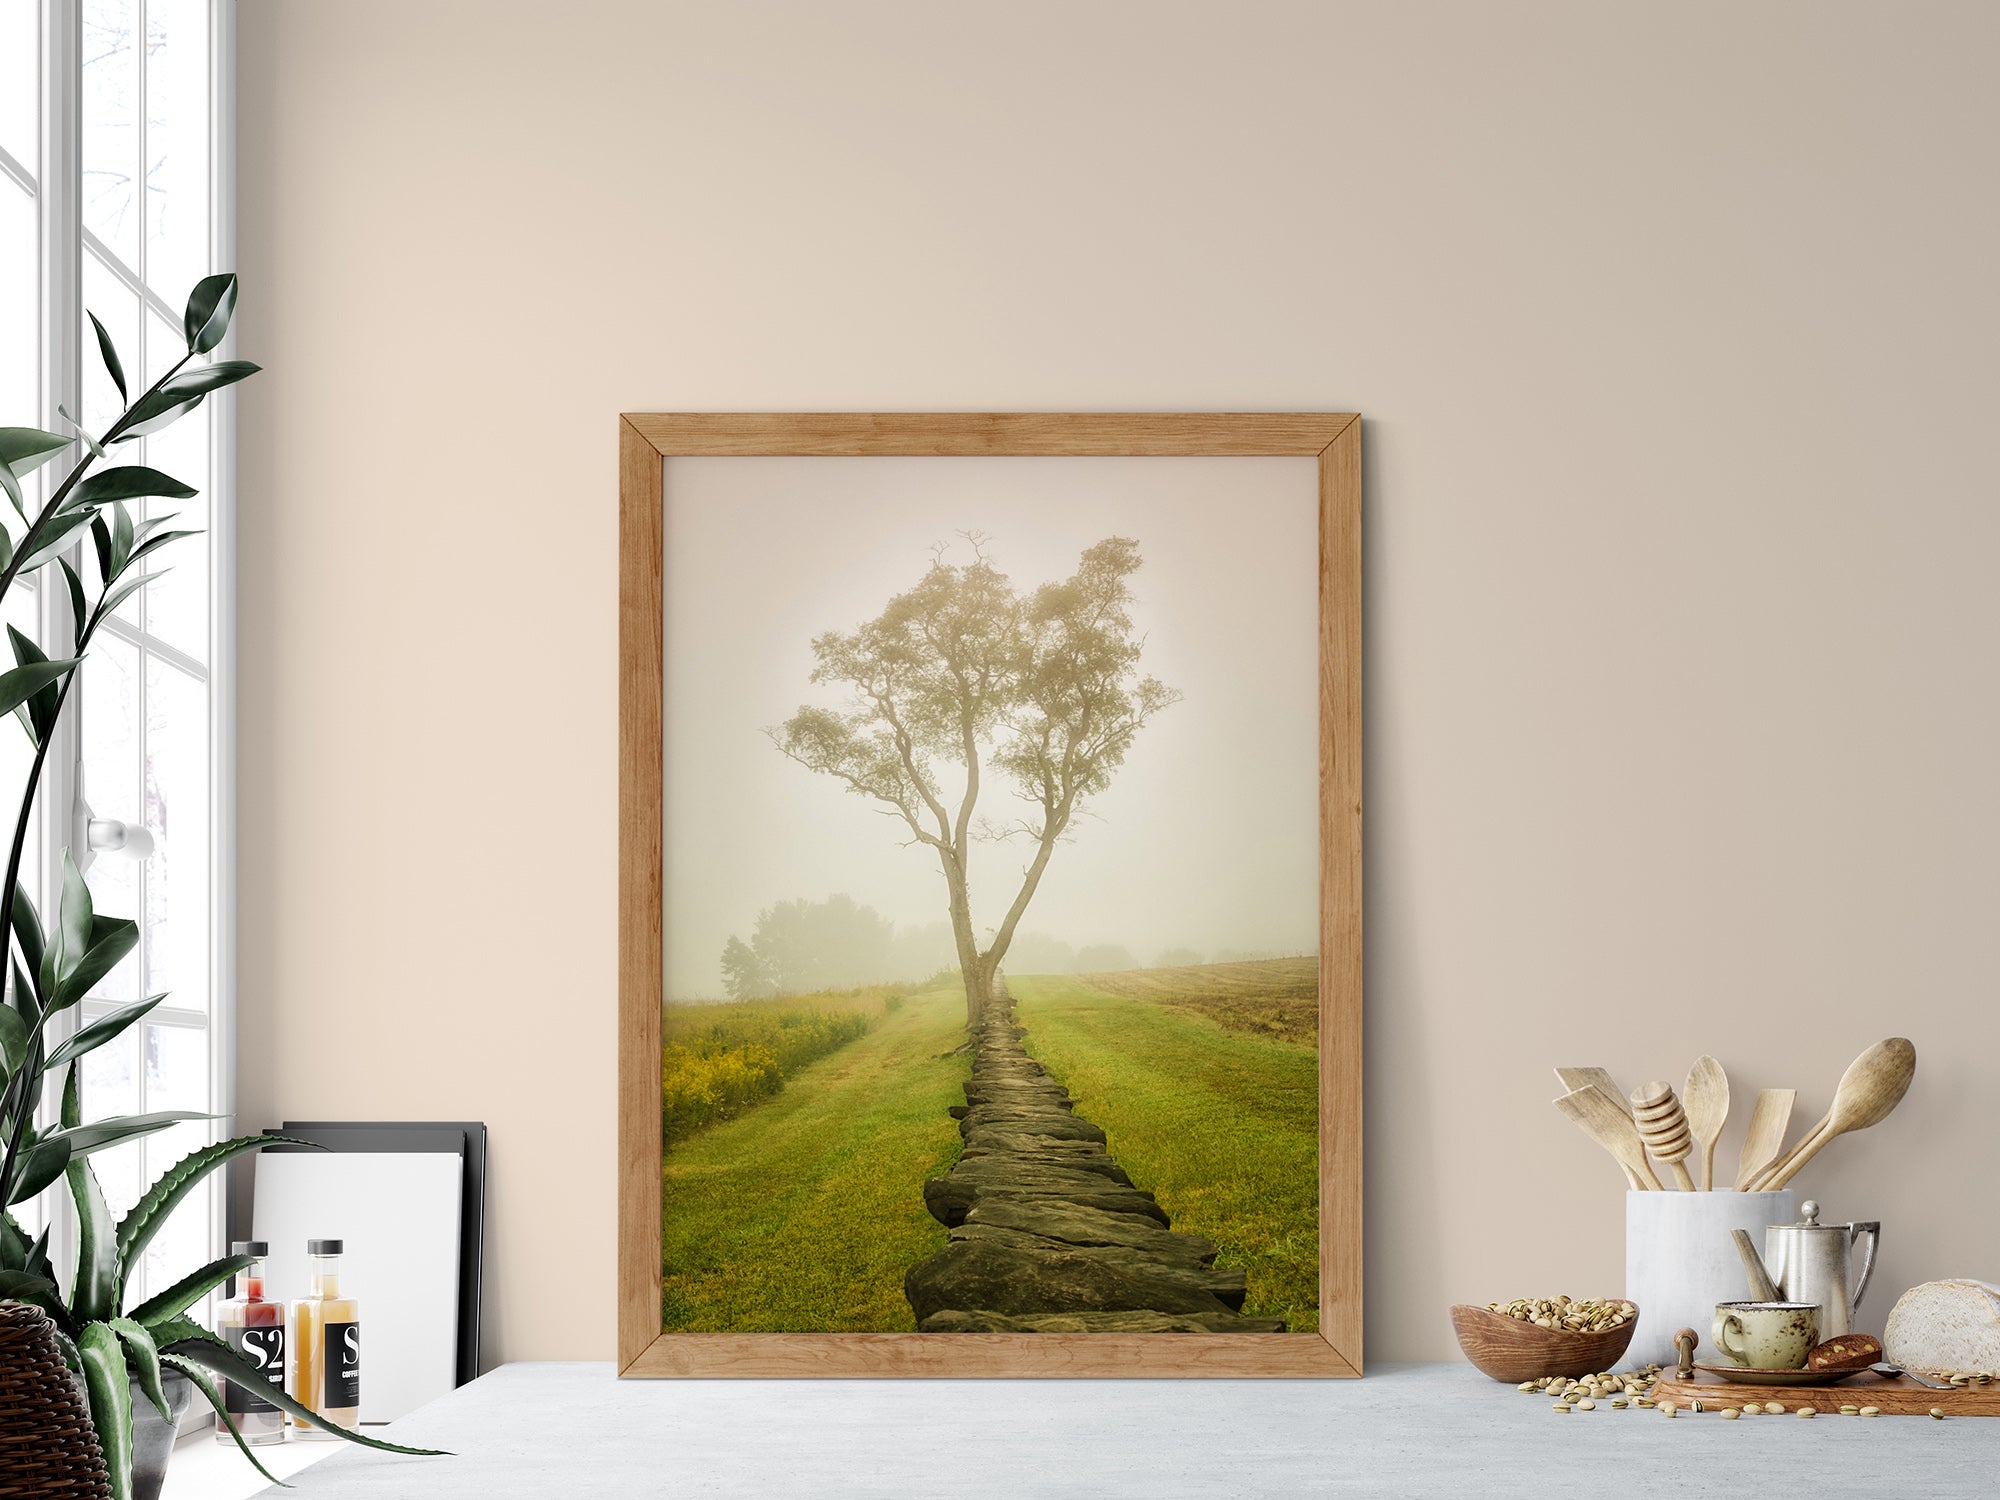 Farmhouse Wall Decorations: Wall Art Prints for the Home and Workplace